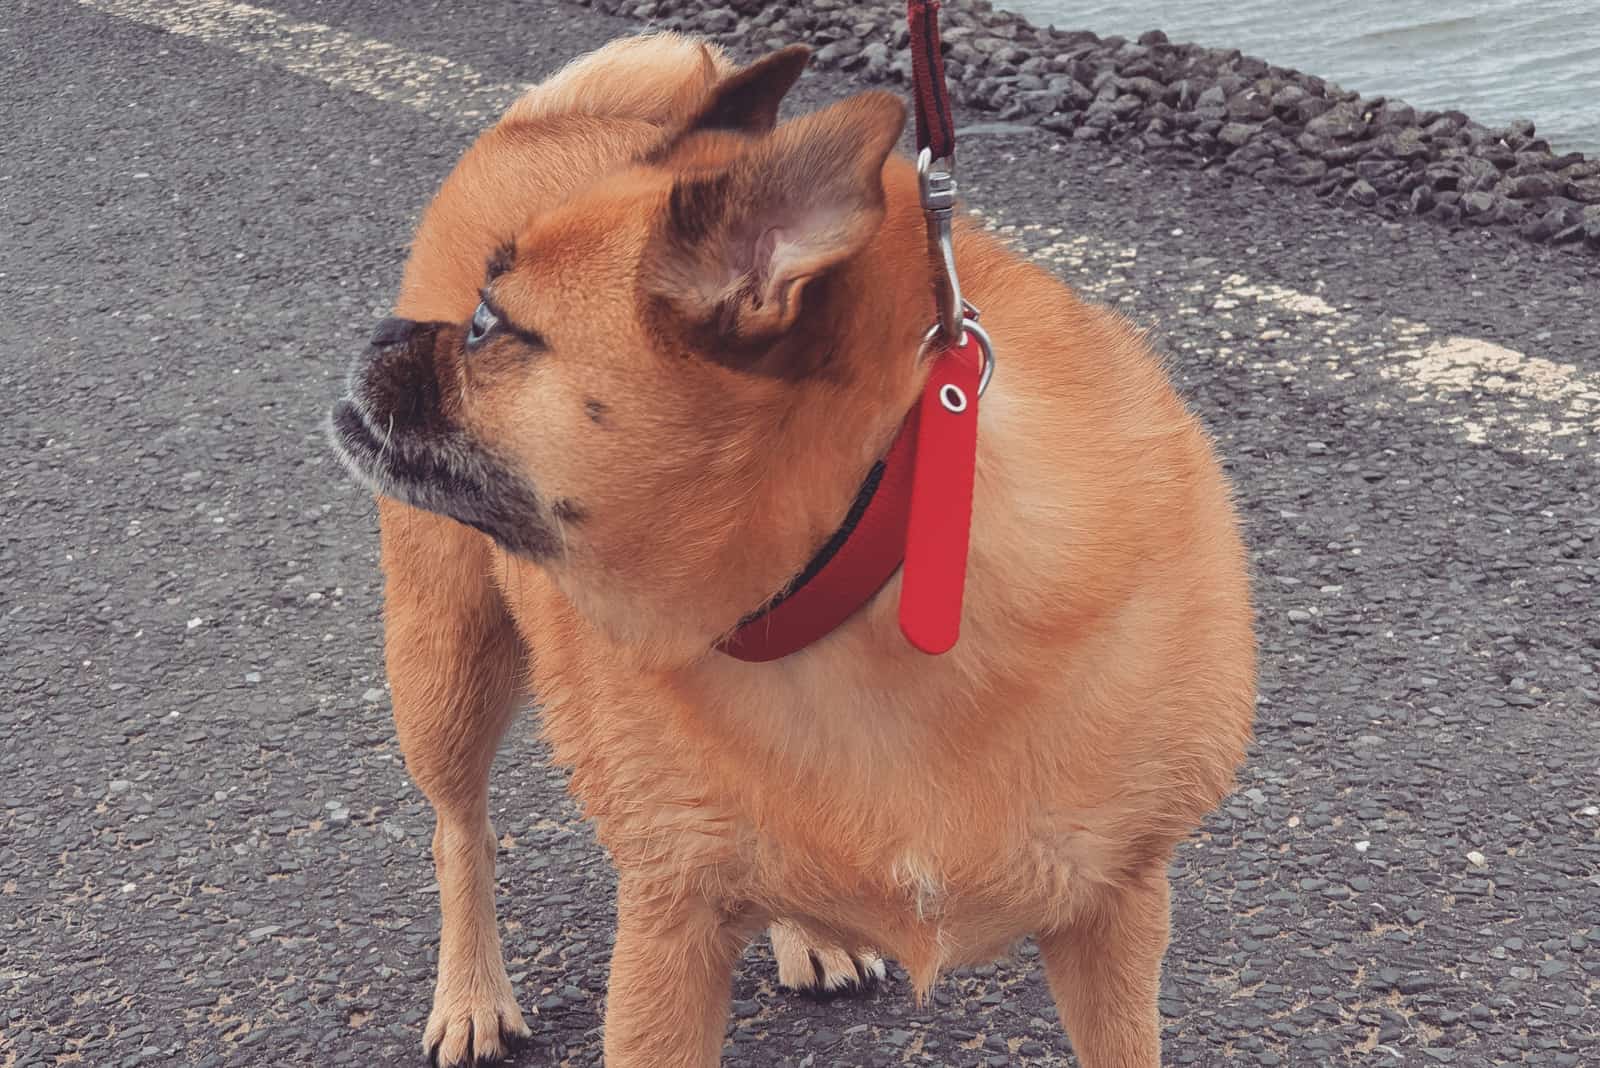 Pom-A-Pug stands in the street and looks behind him